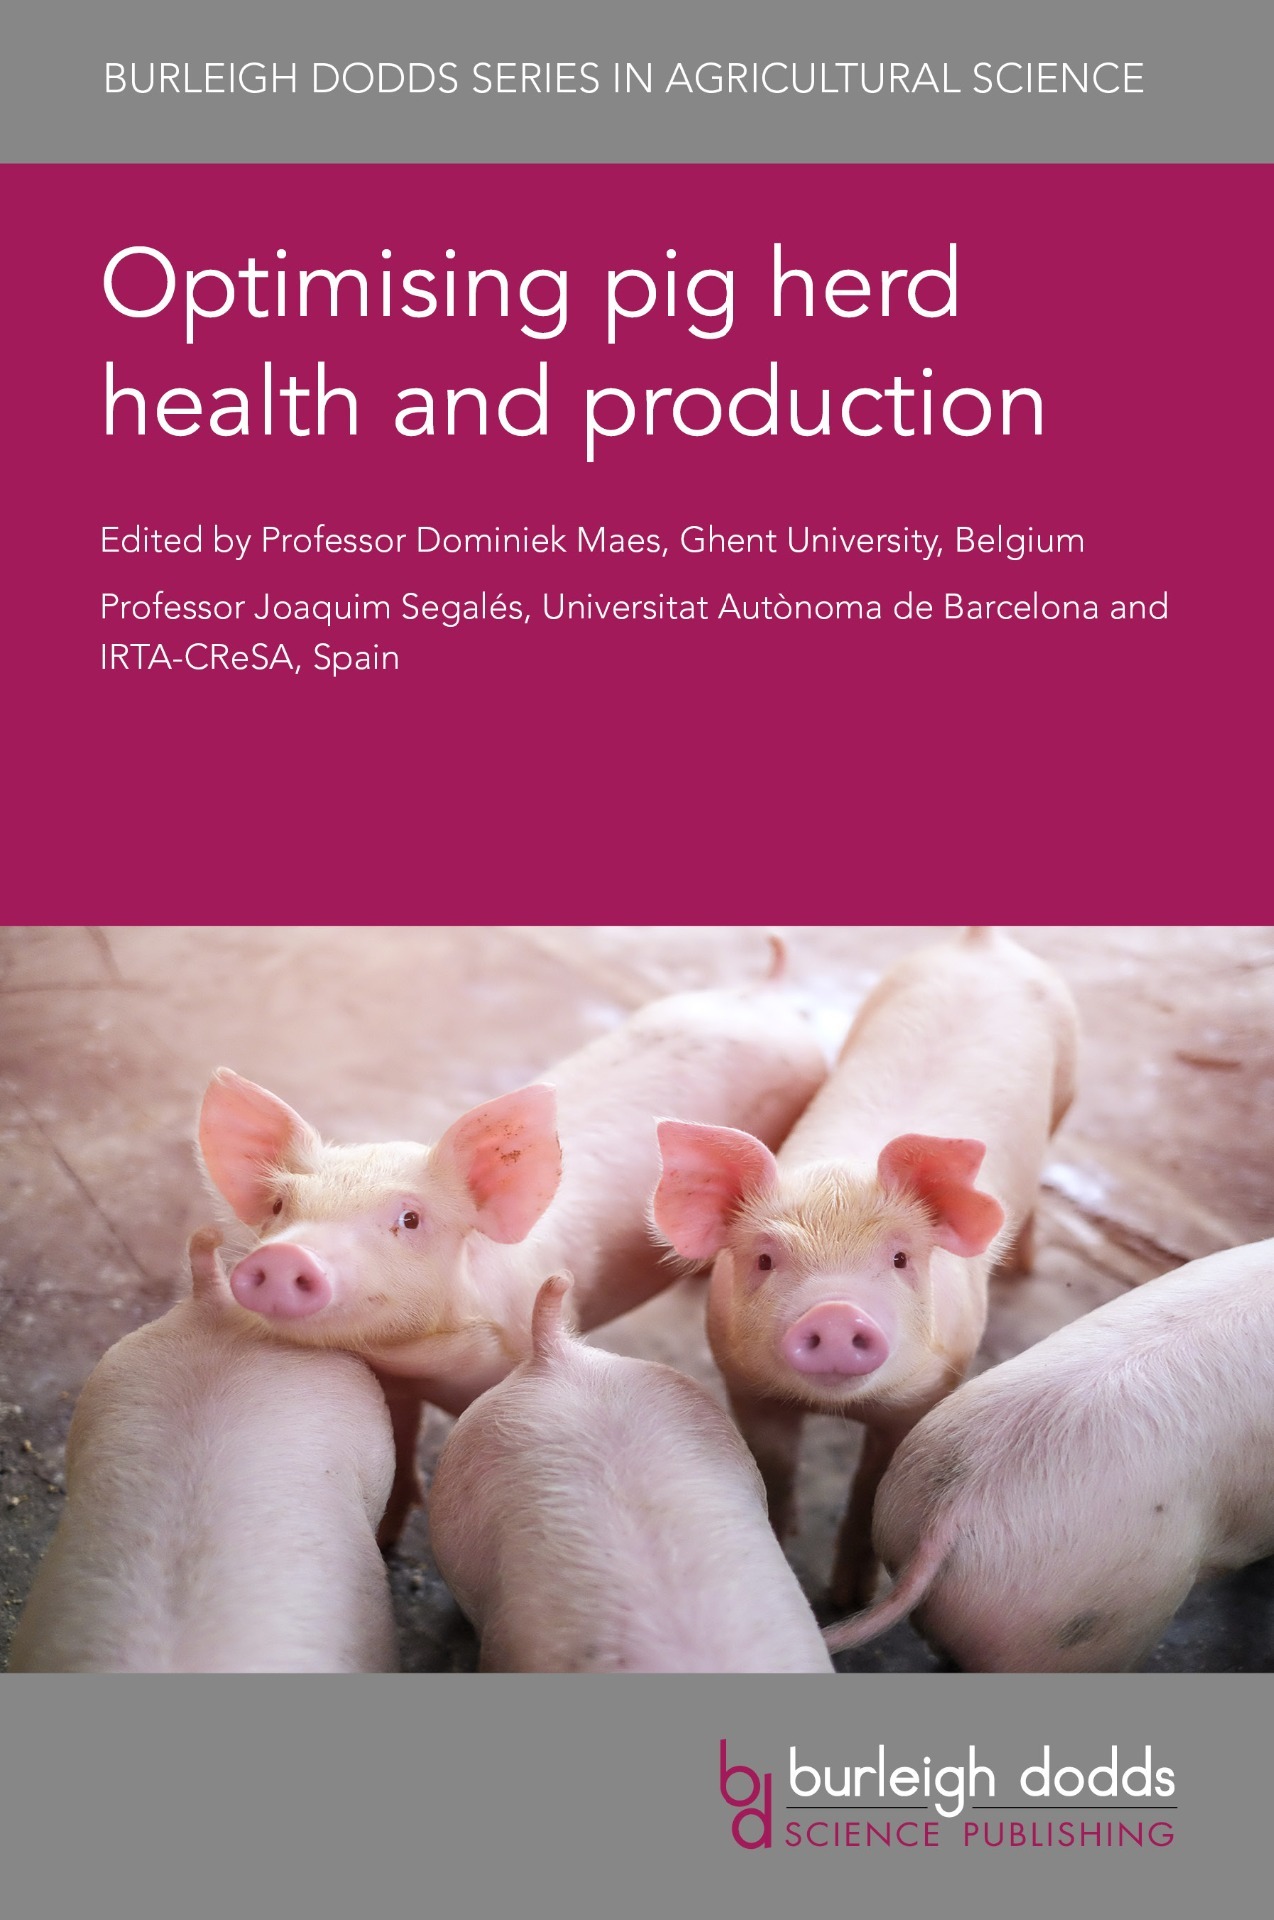 Optimising pig herd health and production